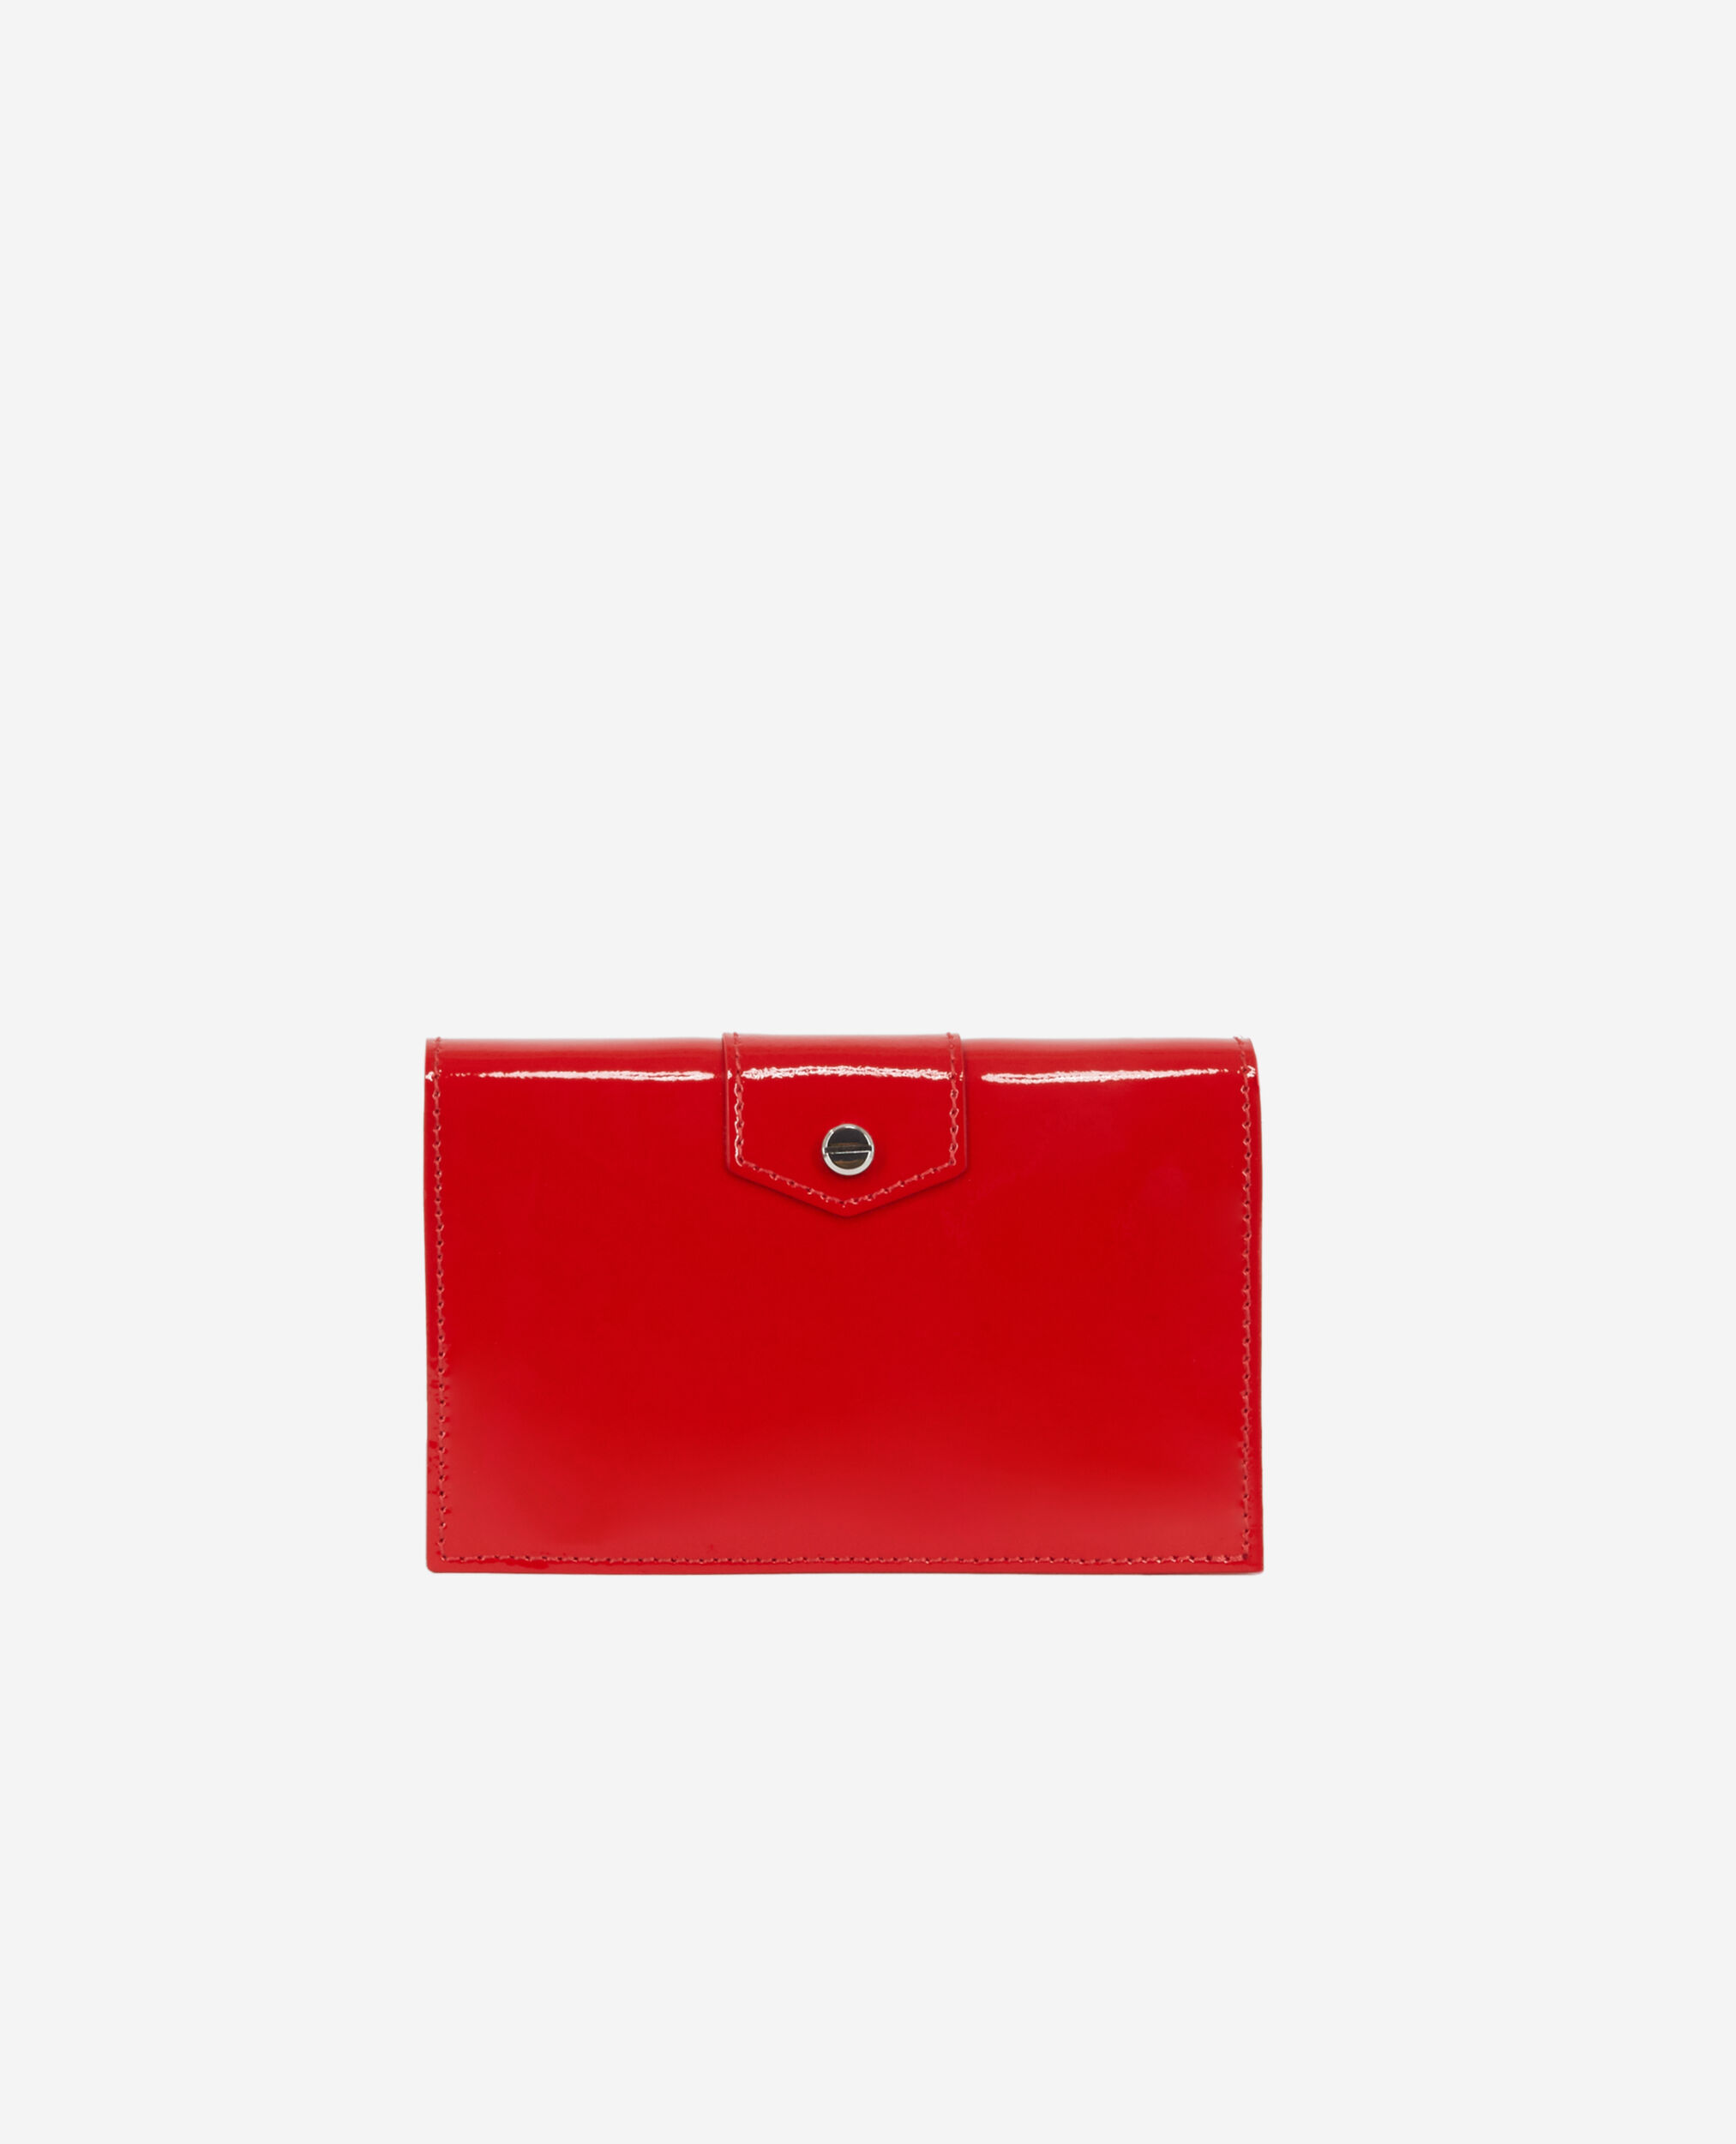 Small Emily clutch bag in red leather, RED, hi-res image number null